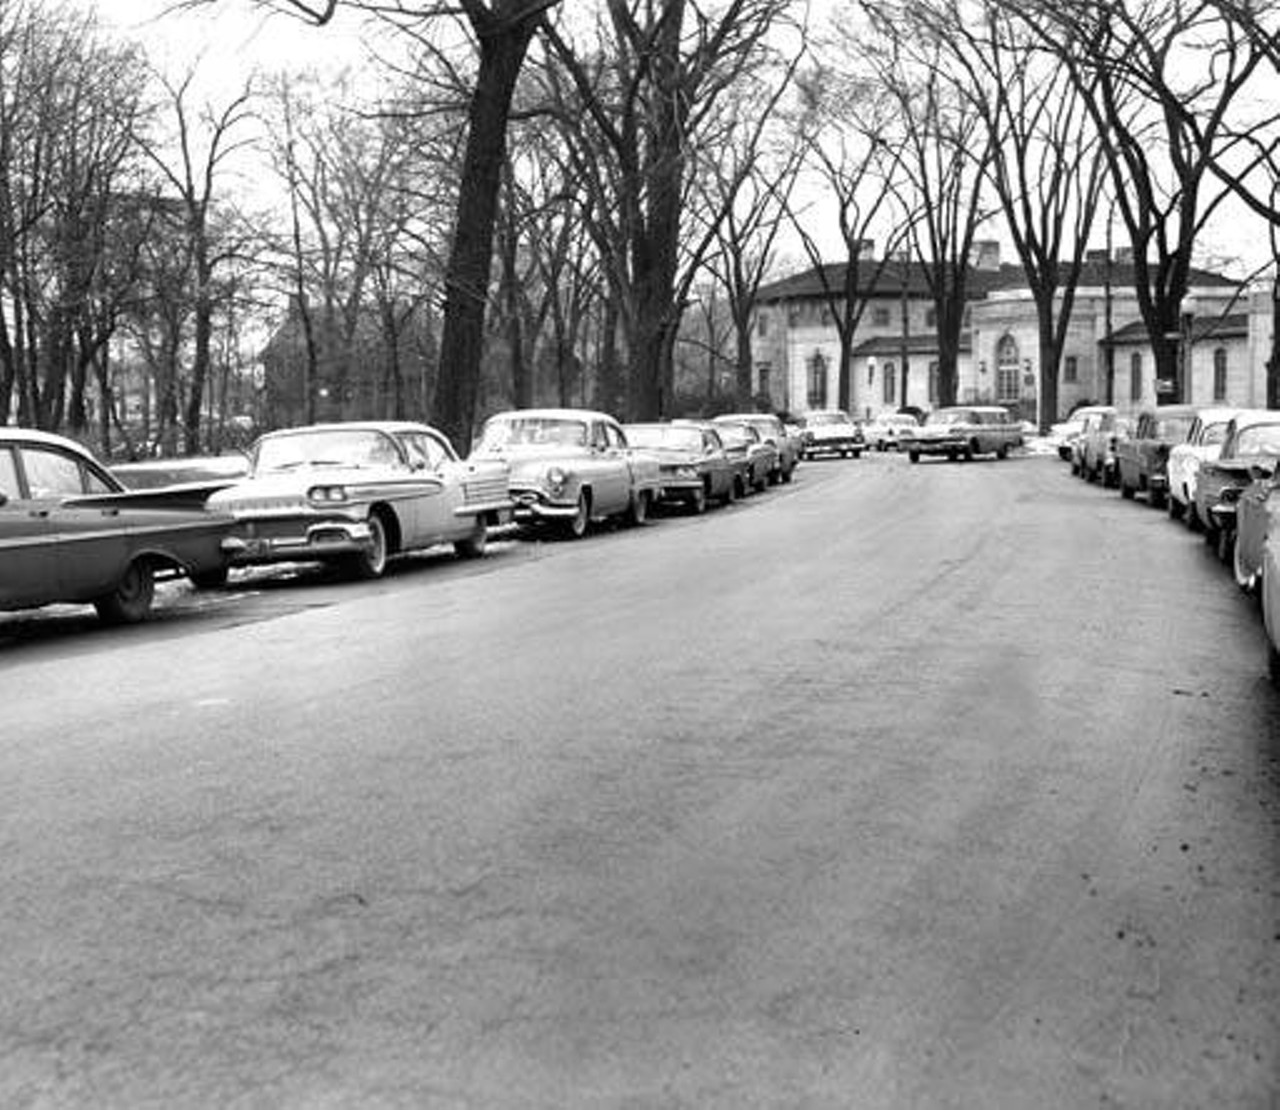 Cars parked in front of the Institute of Music on East Boulevard, 1962.